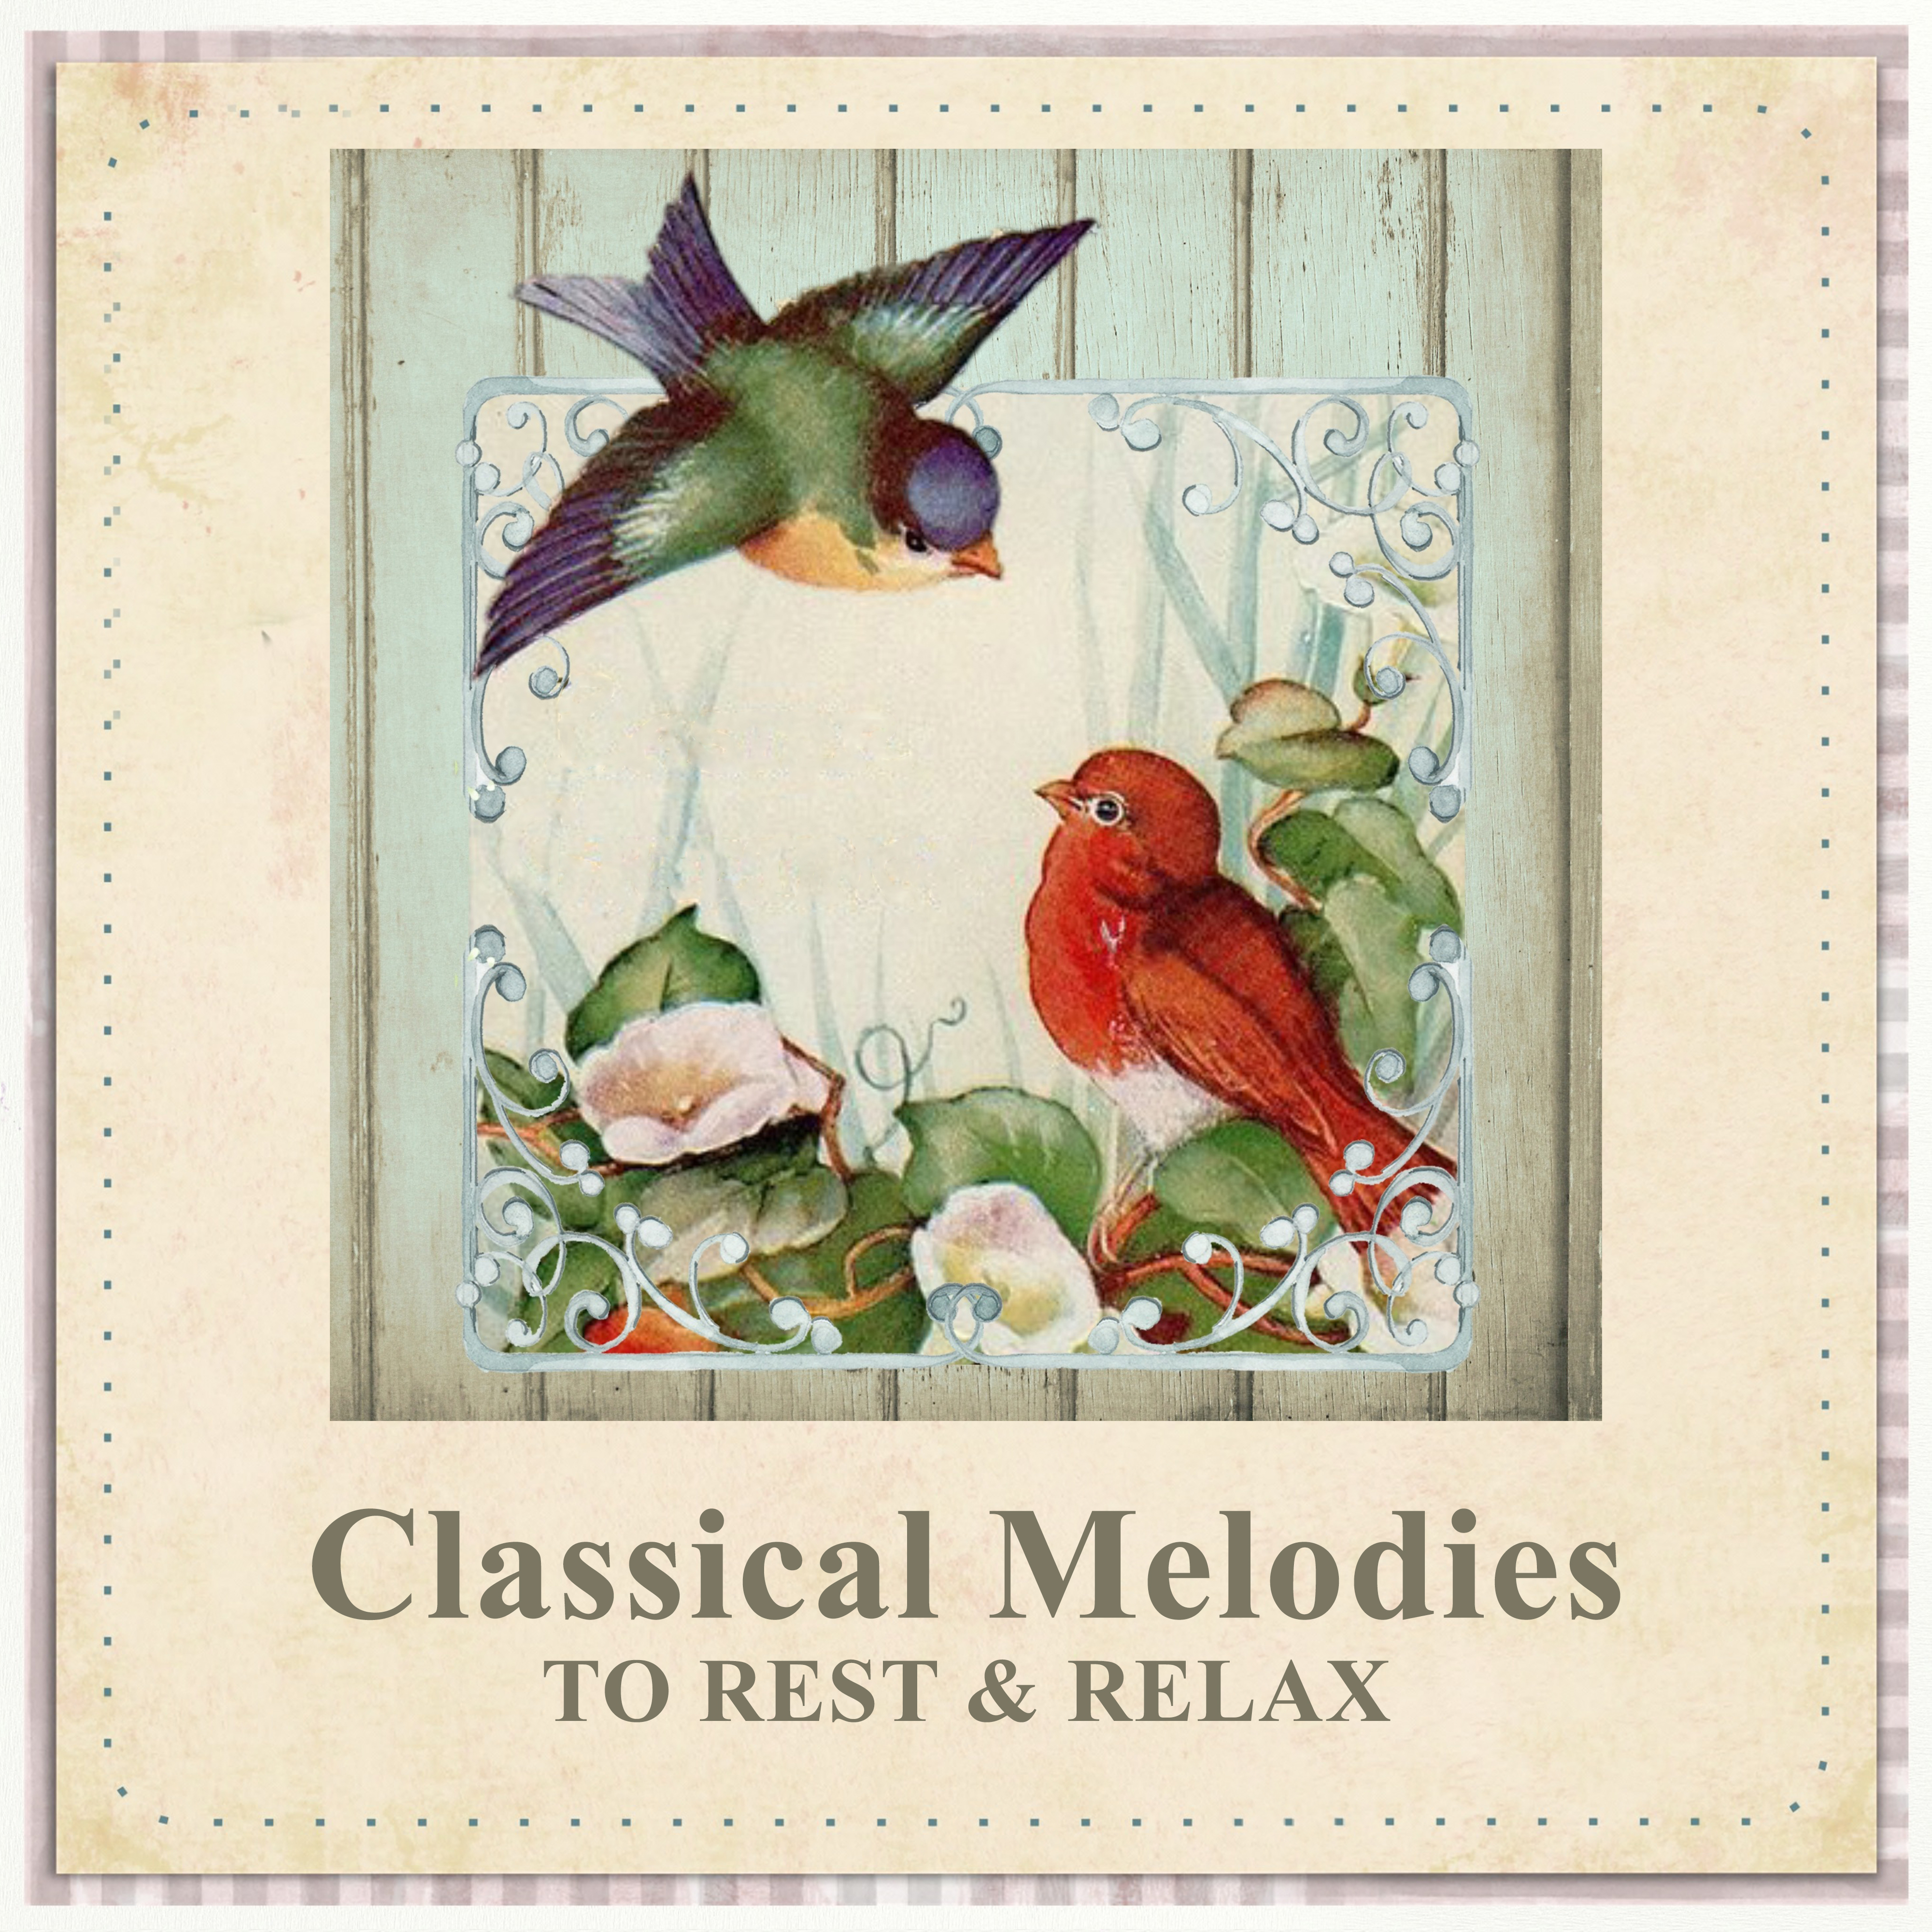 Classical Melodies to Rest & Relax – Soft Piano Music, Rest All Day, Soothing Relaxation, Music to Calm Down